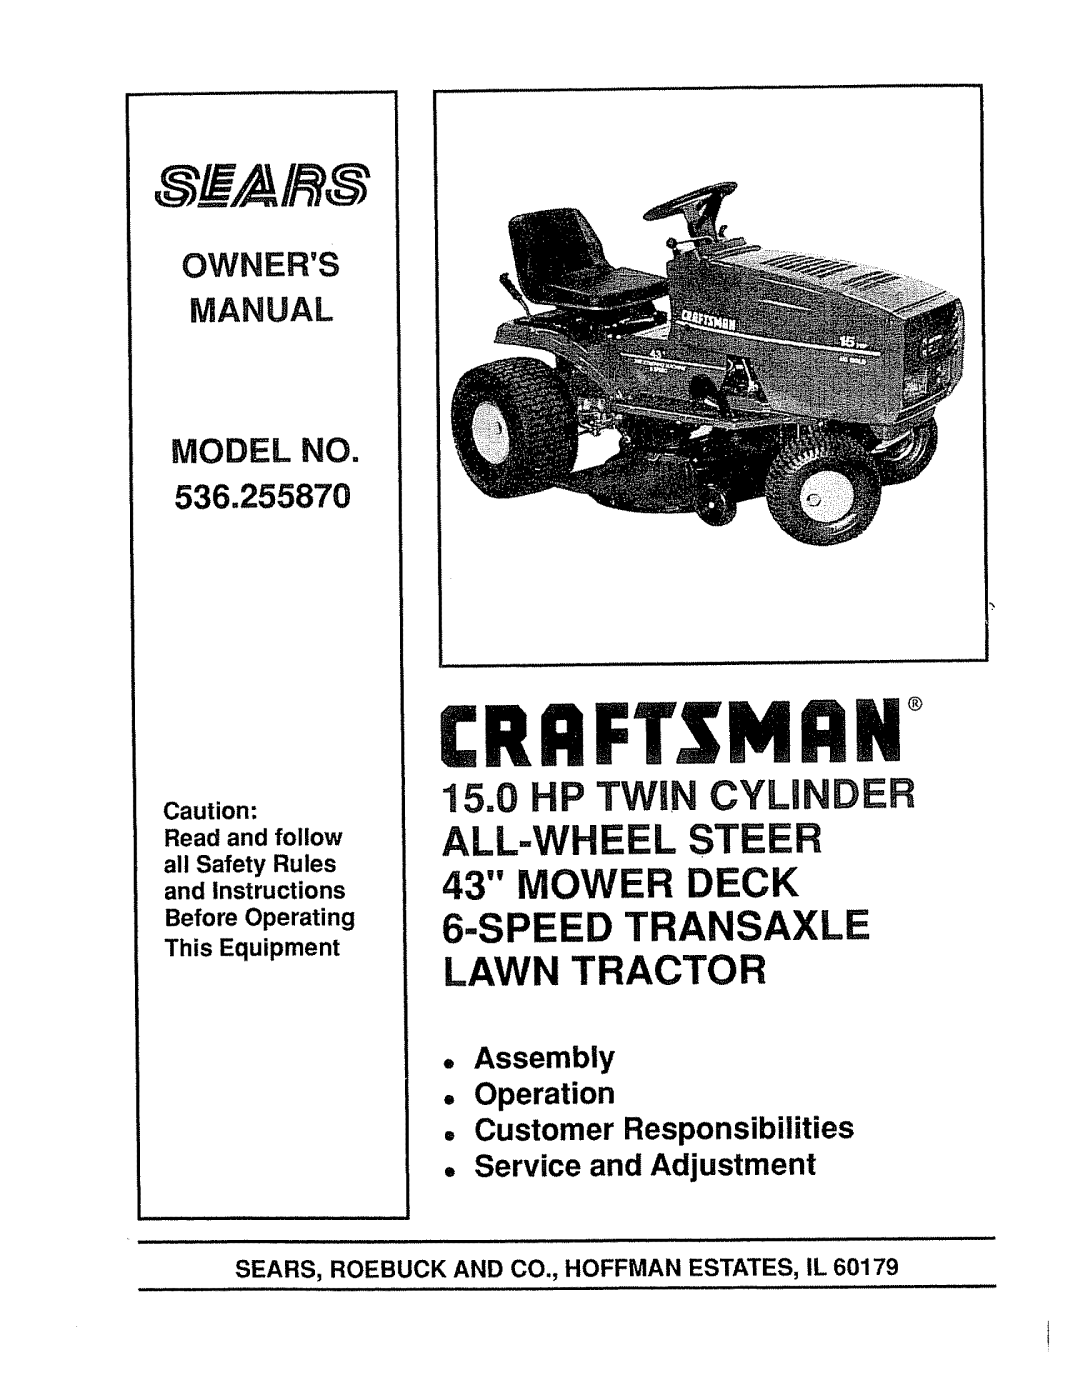 Sears owner manual Owners Manual, MODEL NO 536.255870, Read and follow all Safety Rules and Instructions, Crrftsmrn 